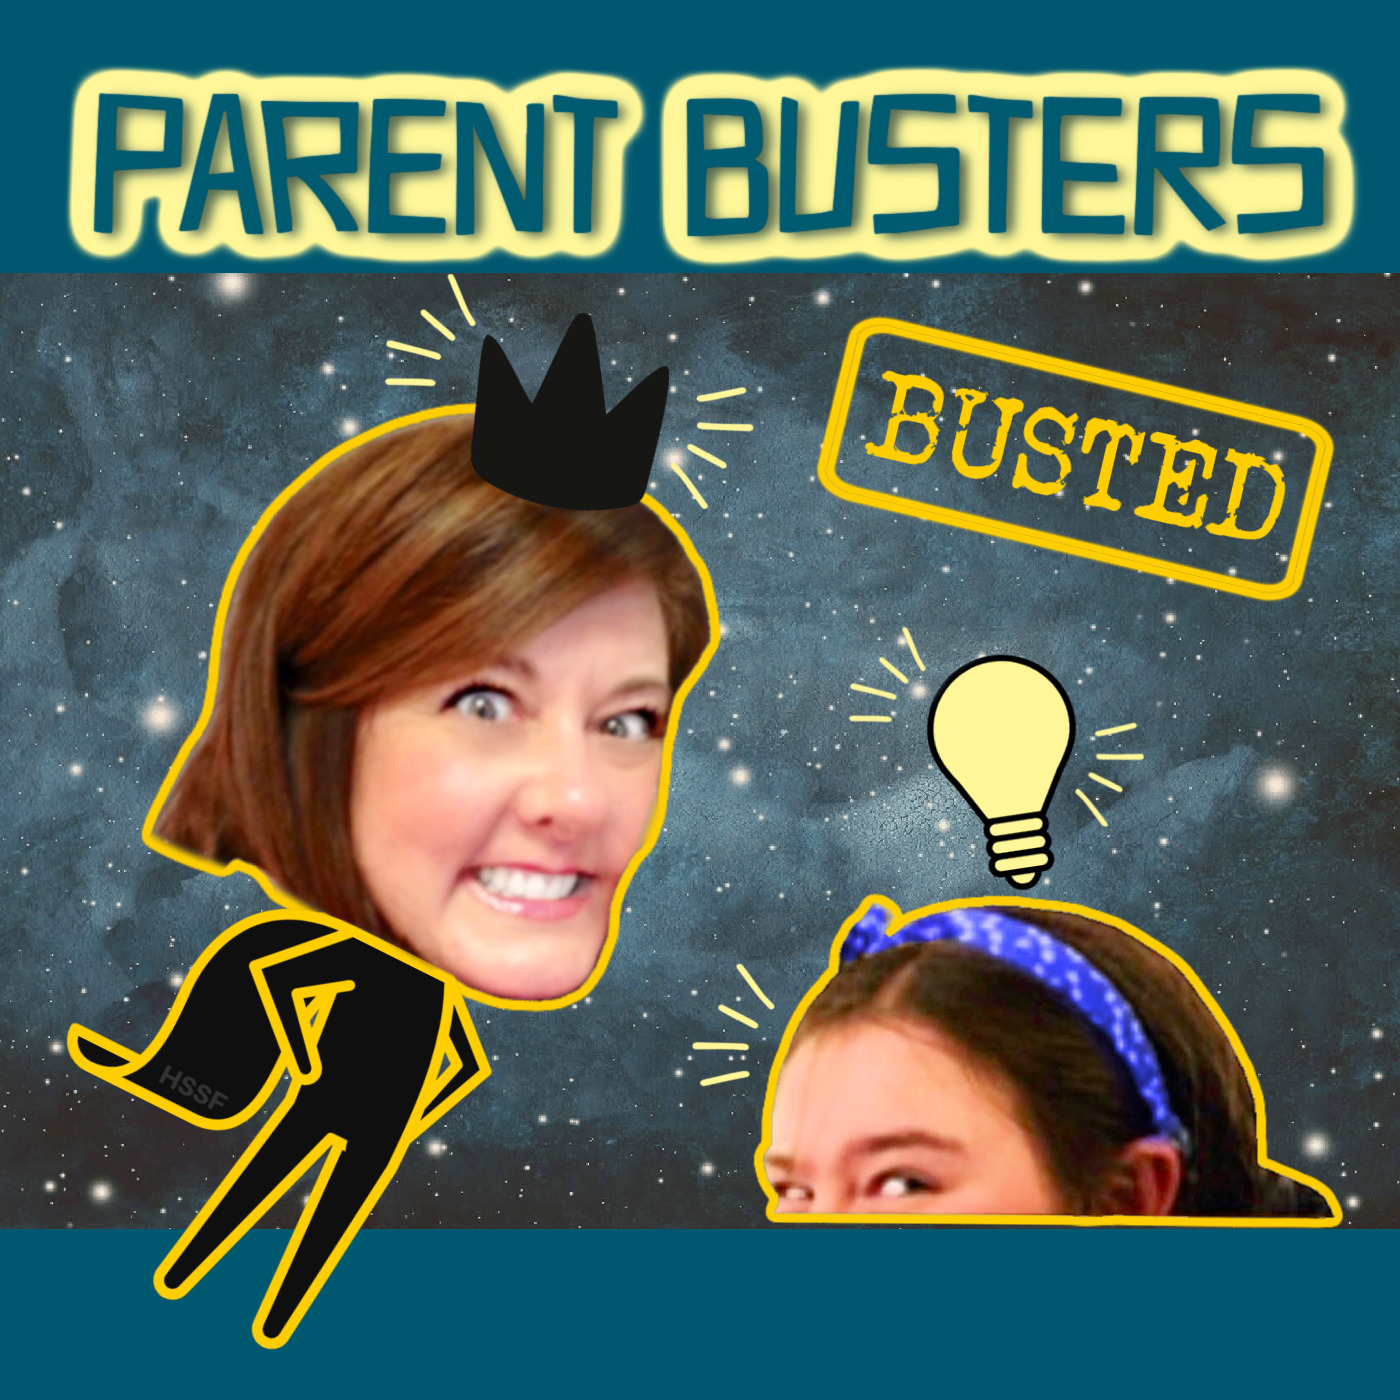 Parent Busters Podcast two female heads on cartoon bodies floating on a dark sky background